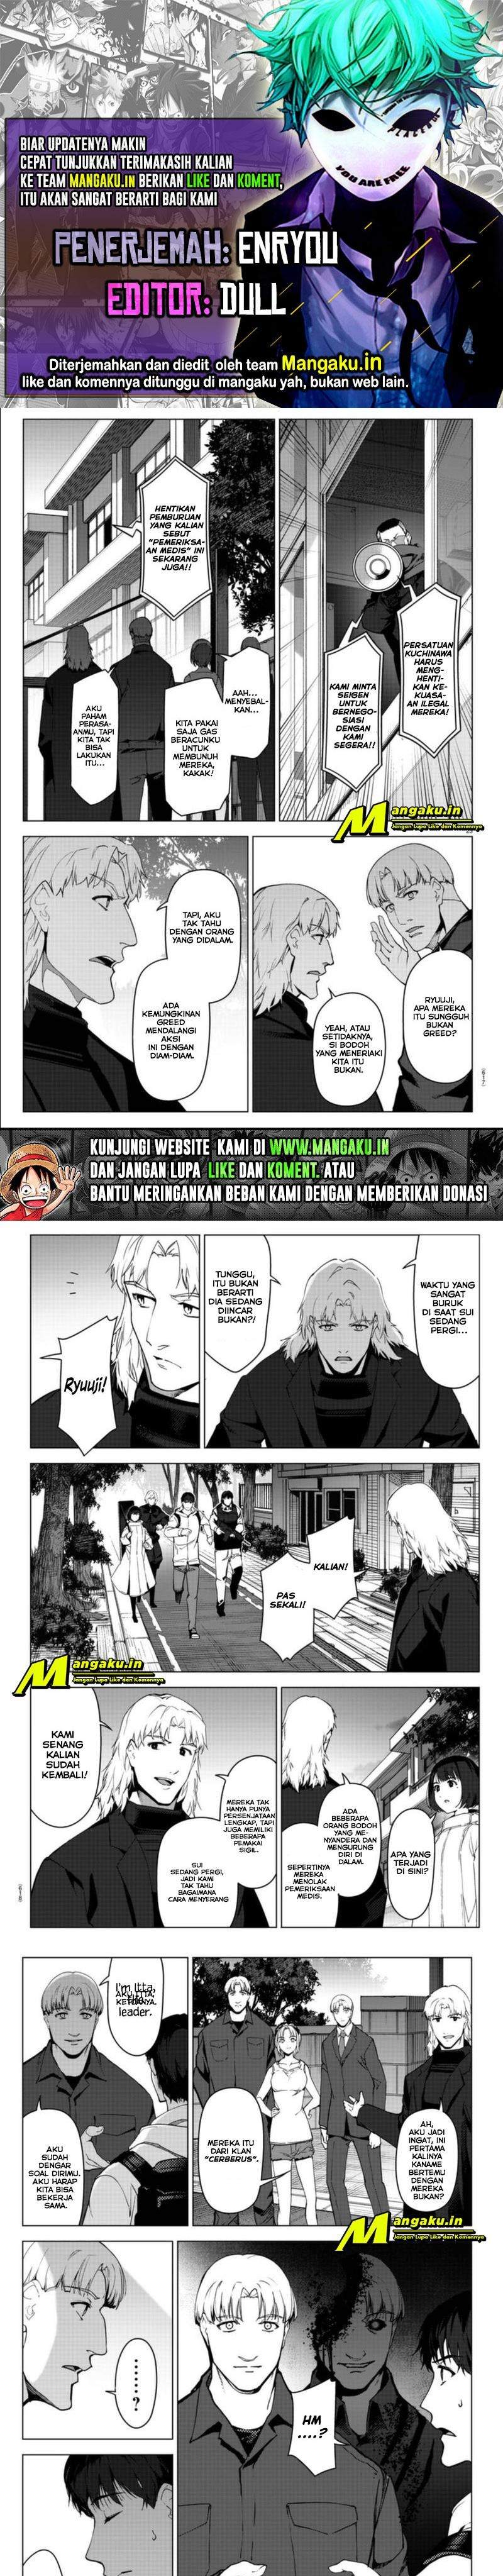 Darwin’s Game Chapter 96-2